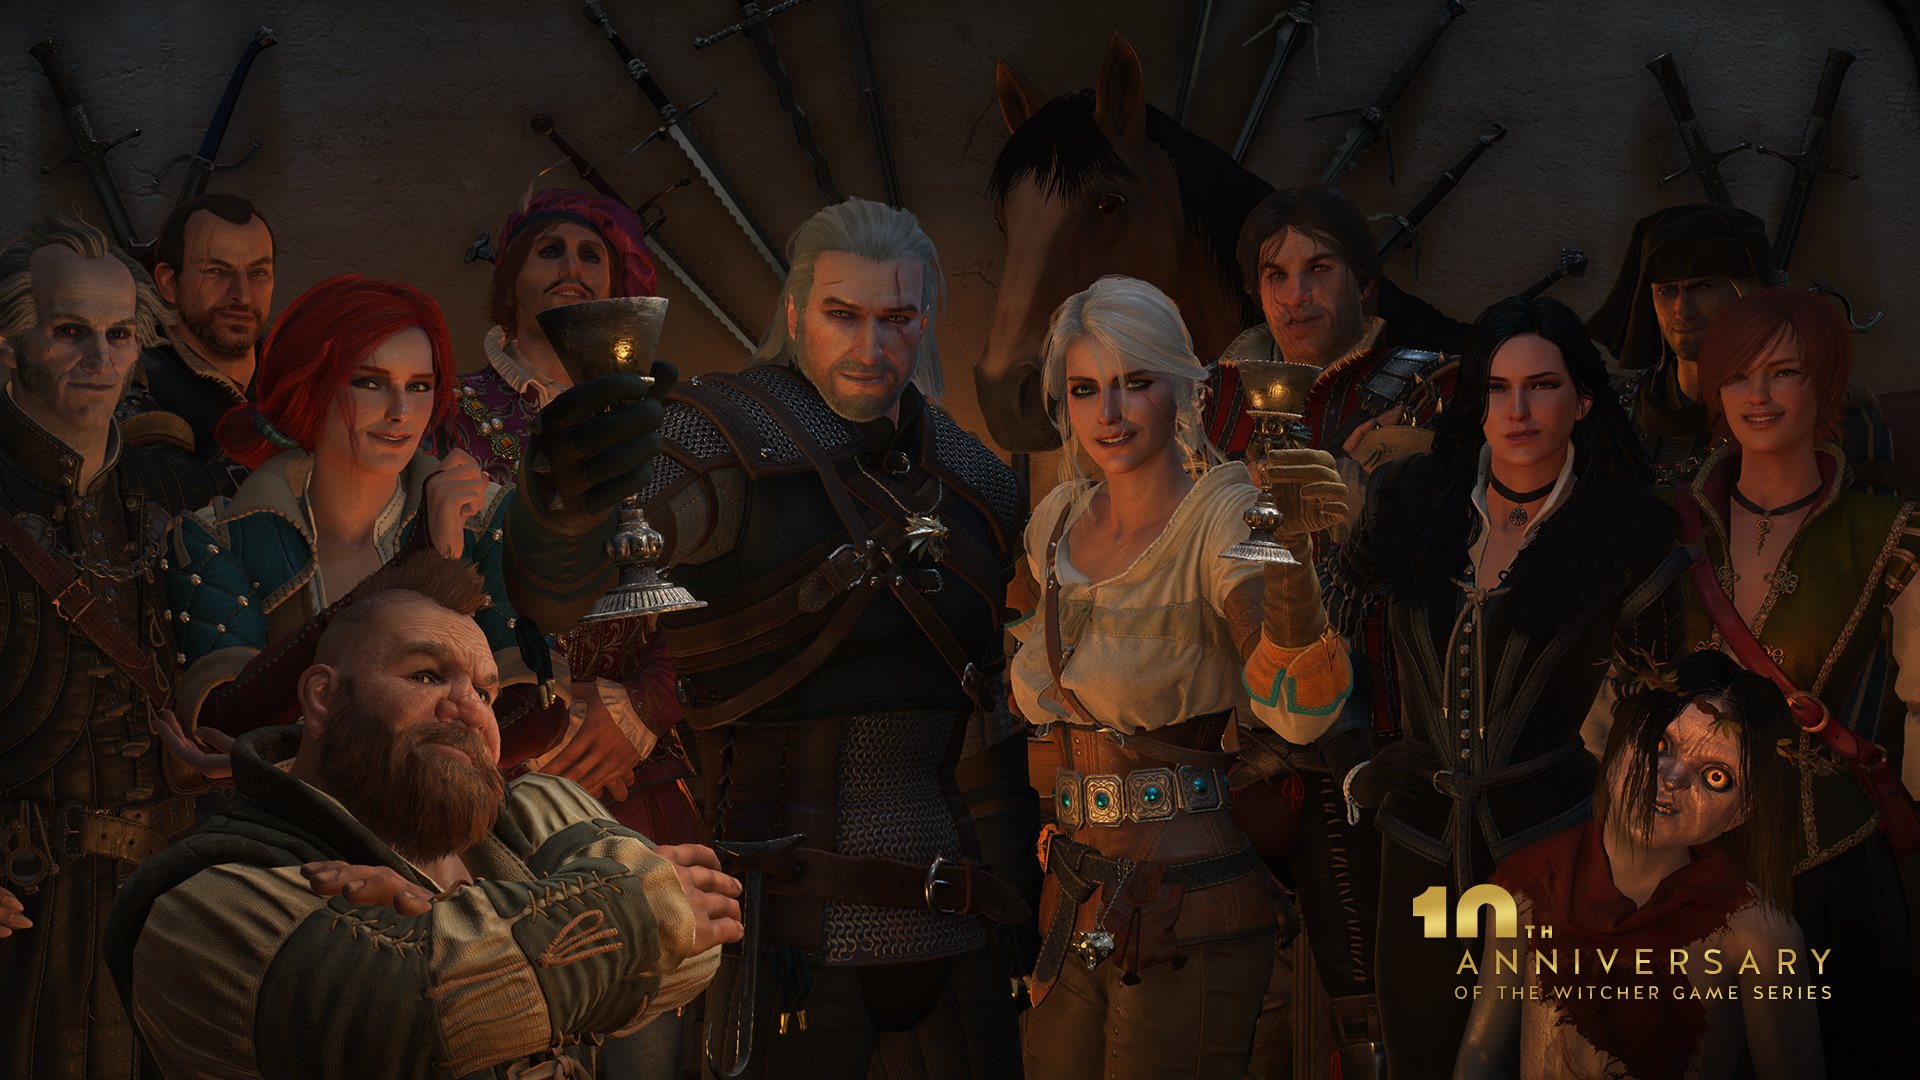 Characters from The Witcher games. (Image credit: Official Witcher wallpaper)